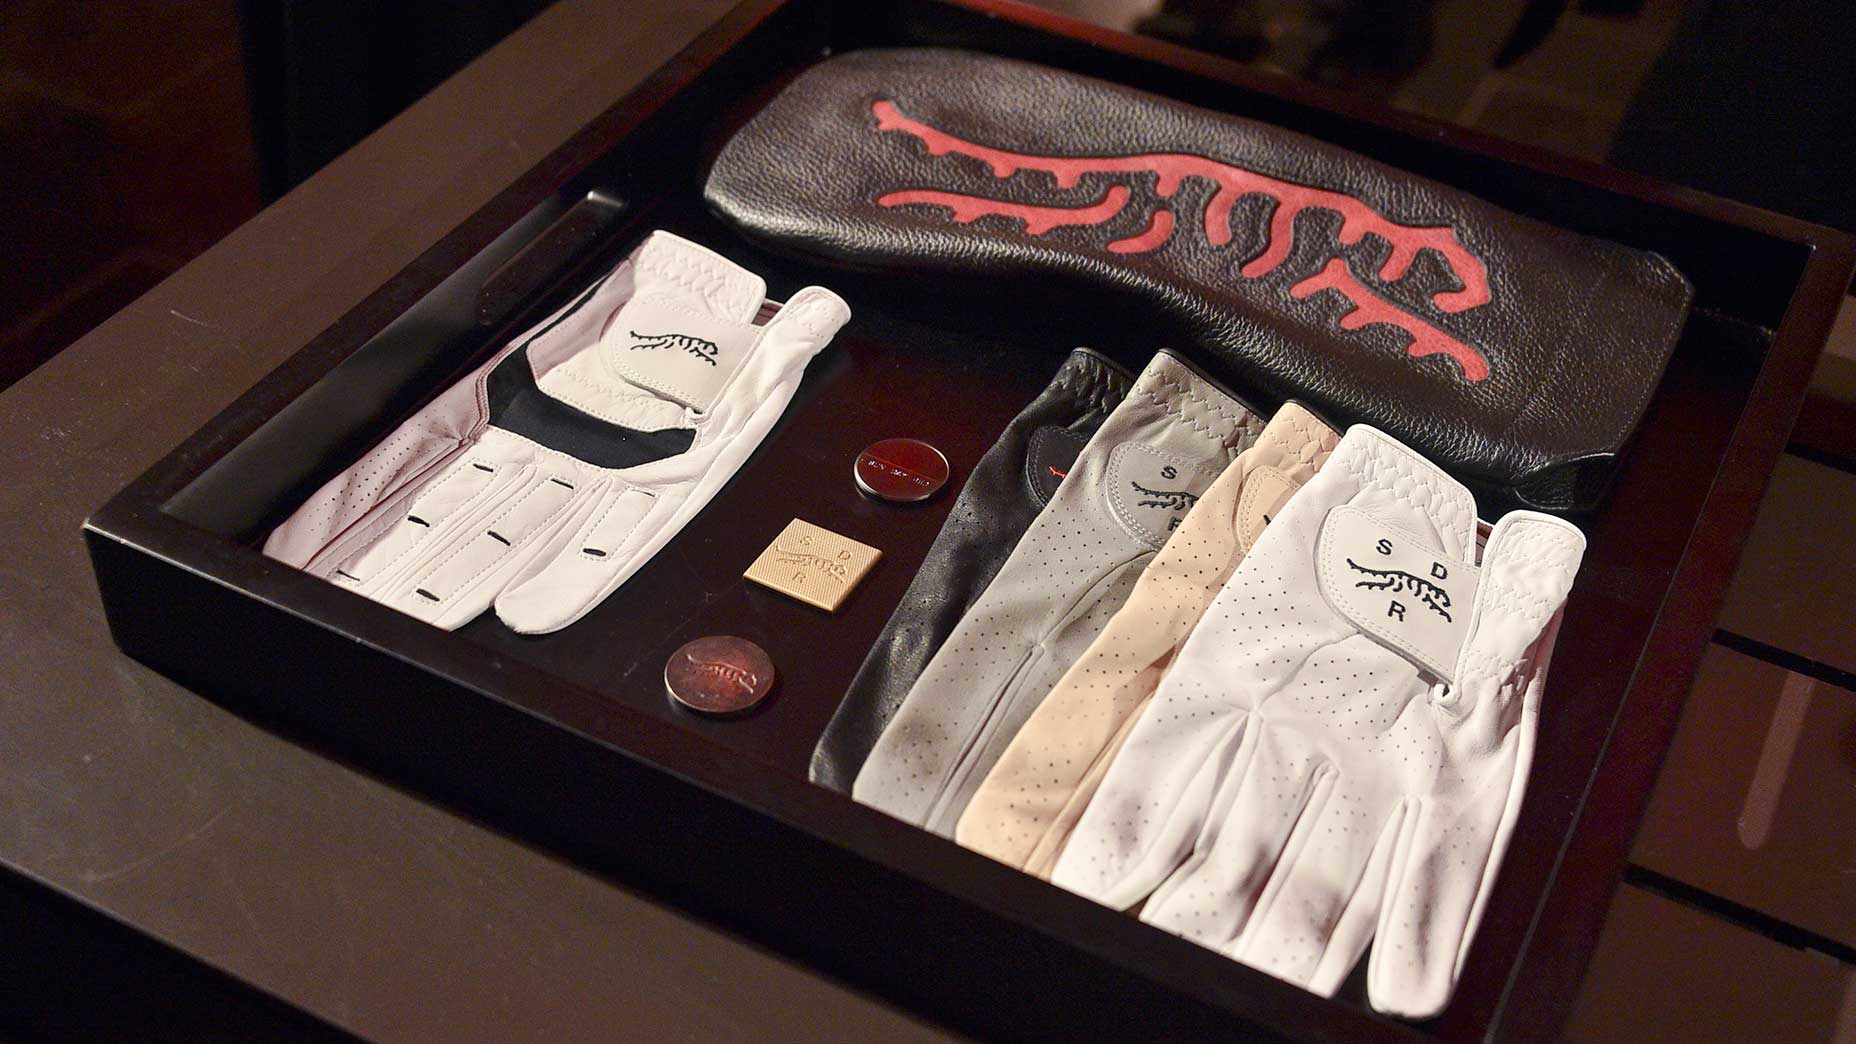 Tiger Woods' Sunday red gloves and gear